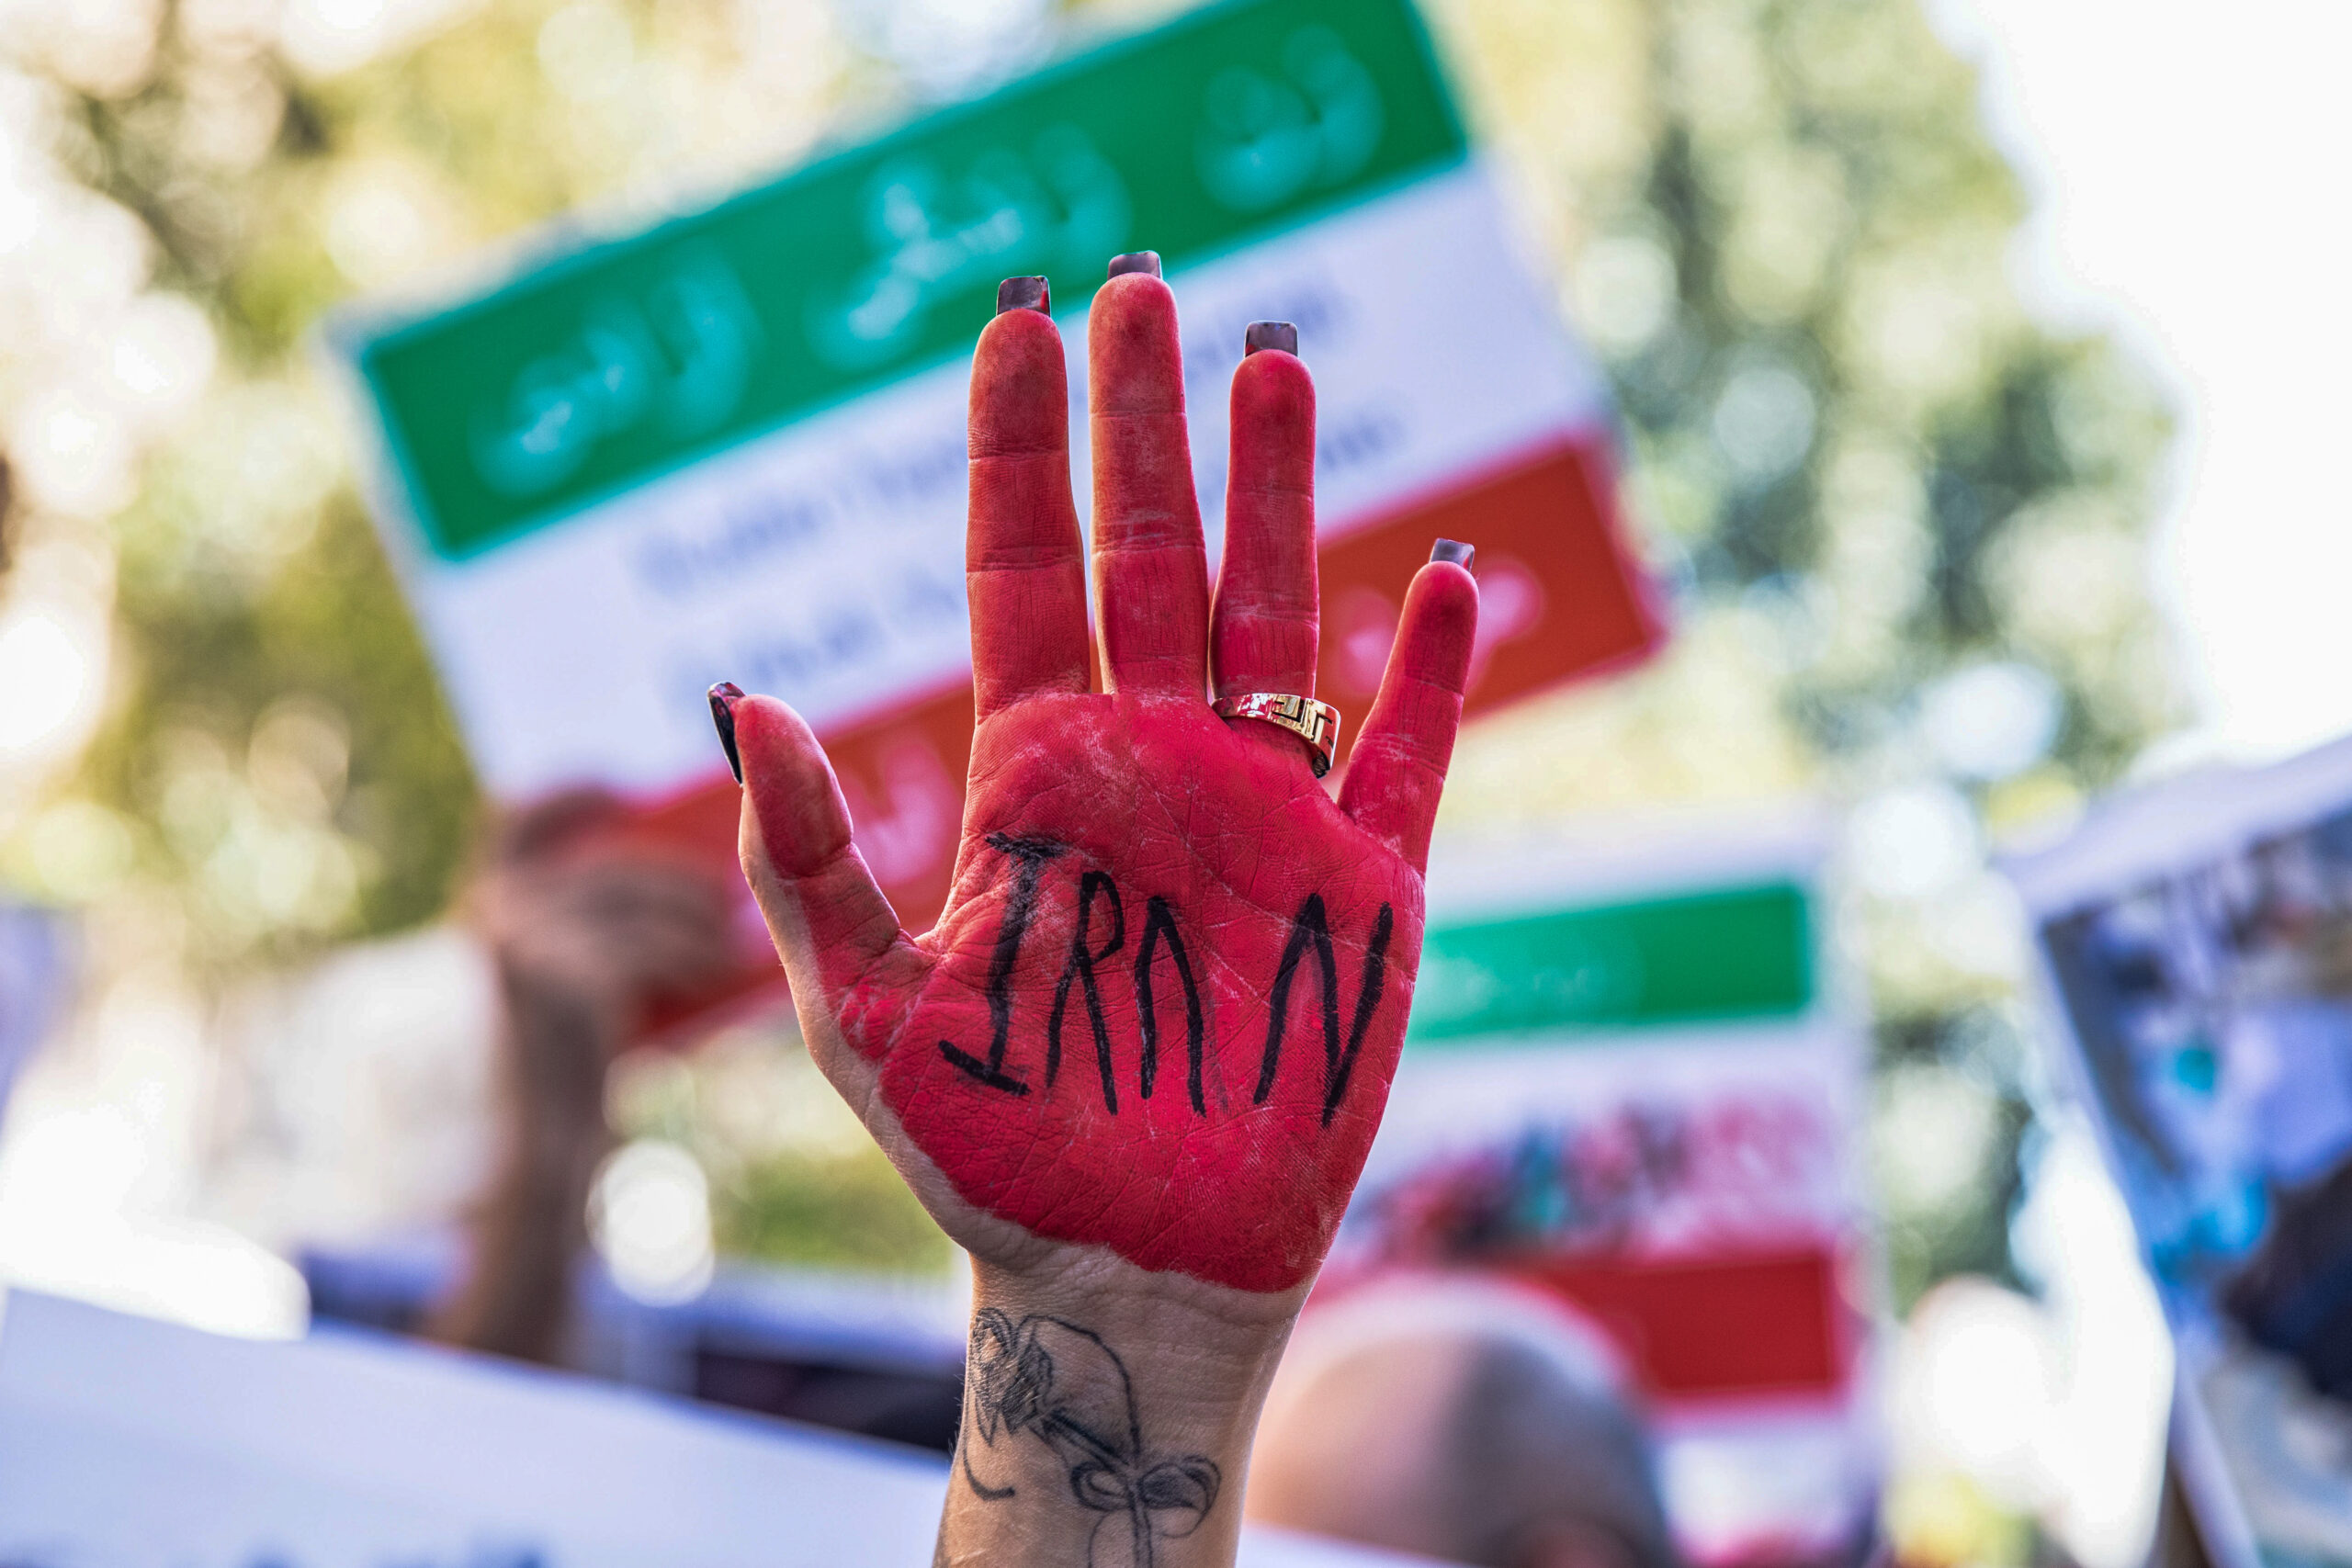 A protester with red painted hands and inscription "Iran" takes part outside the Iranian Consulate during the demonstration.